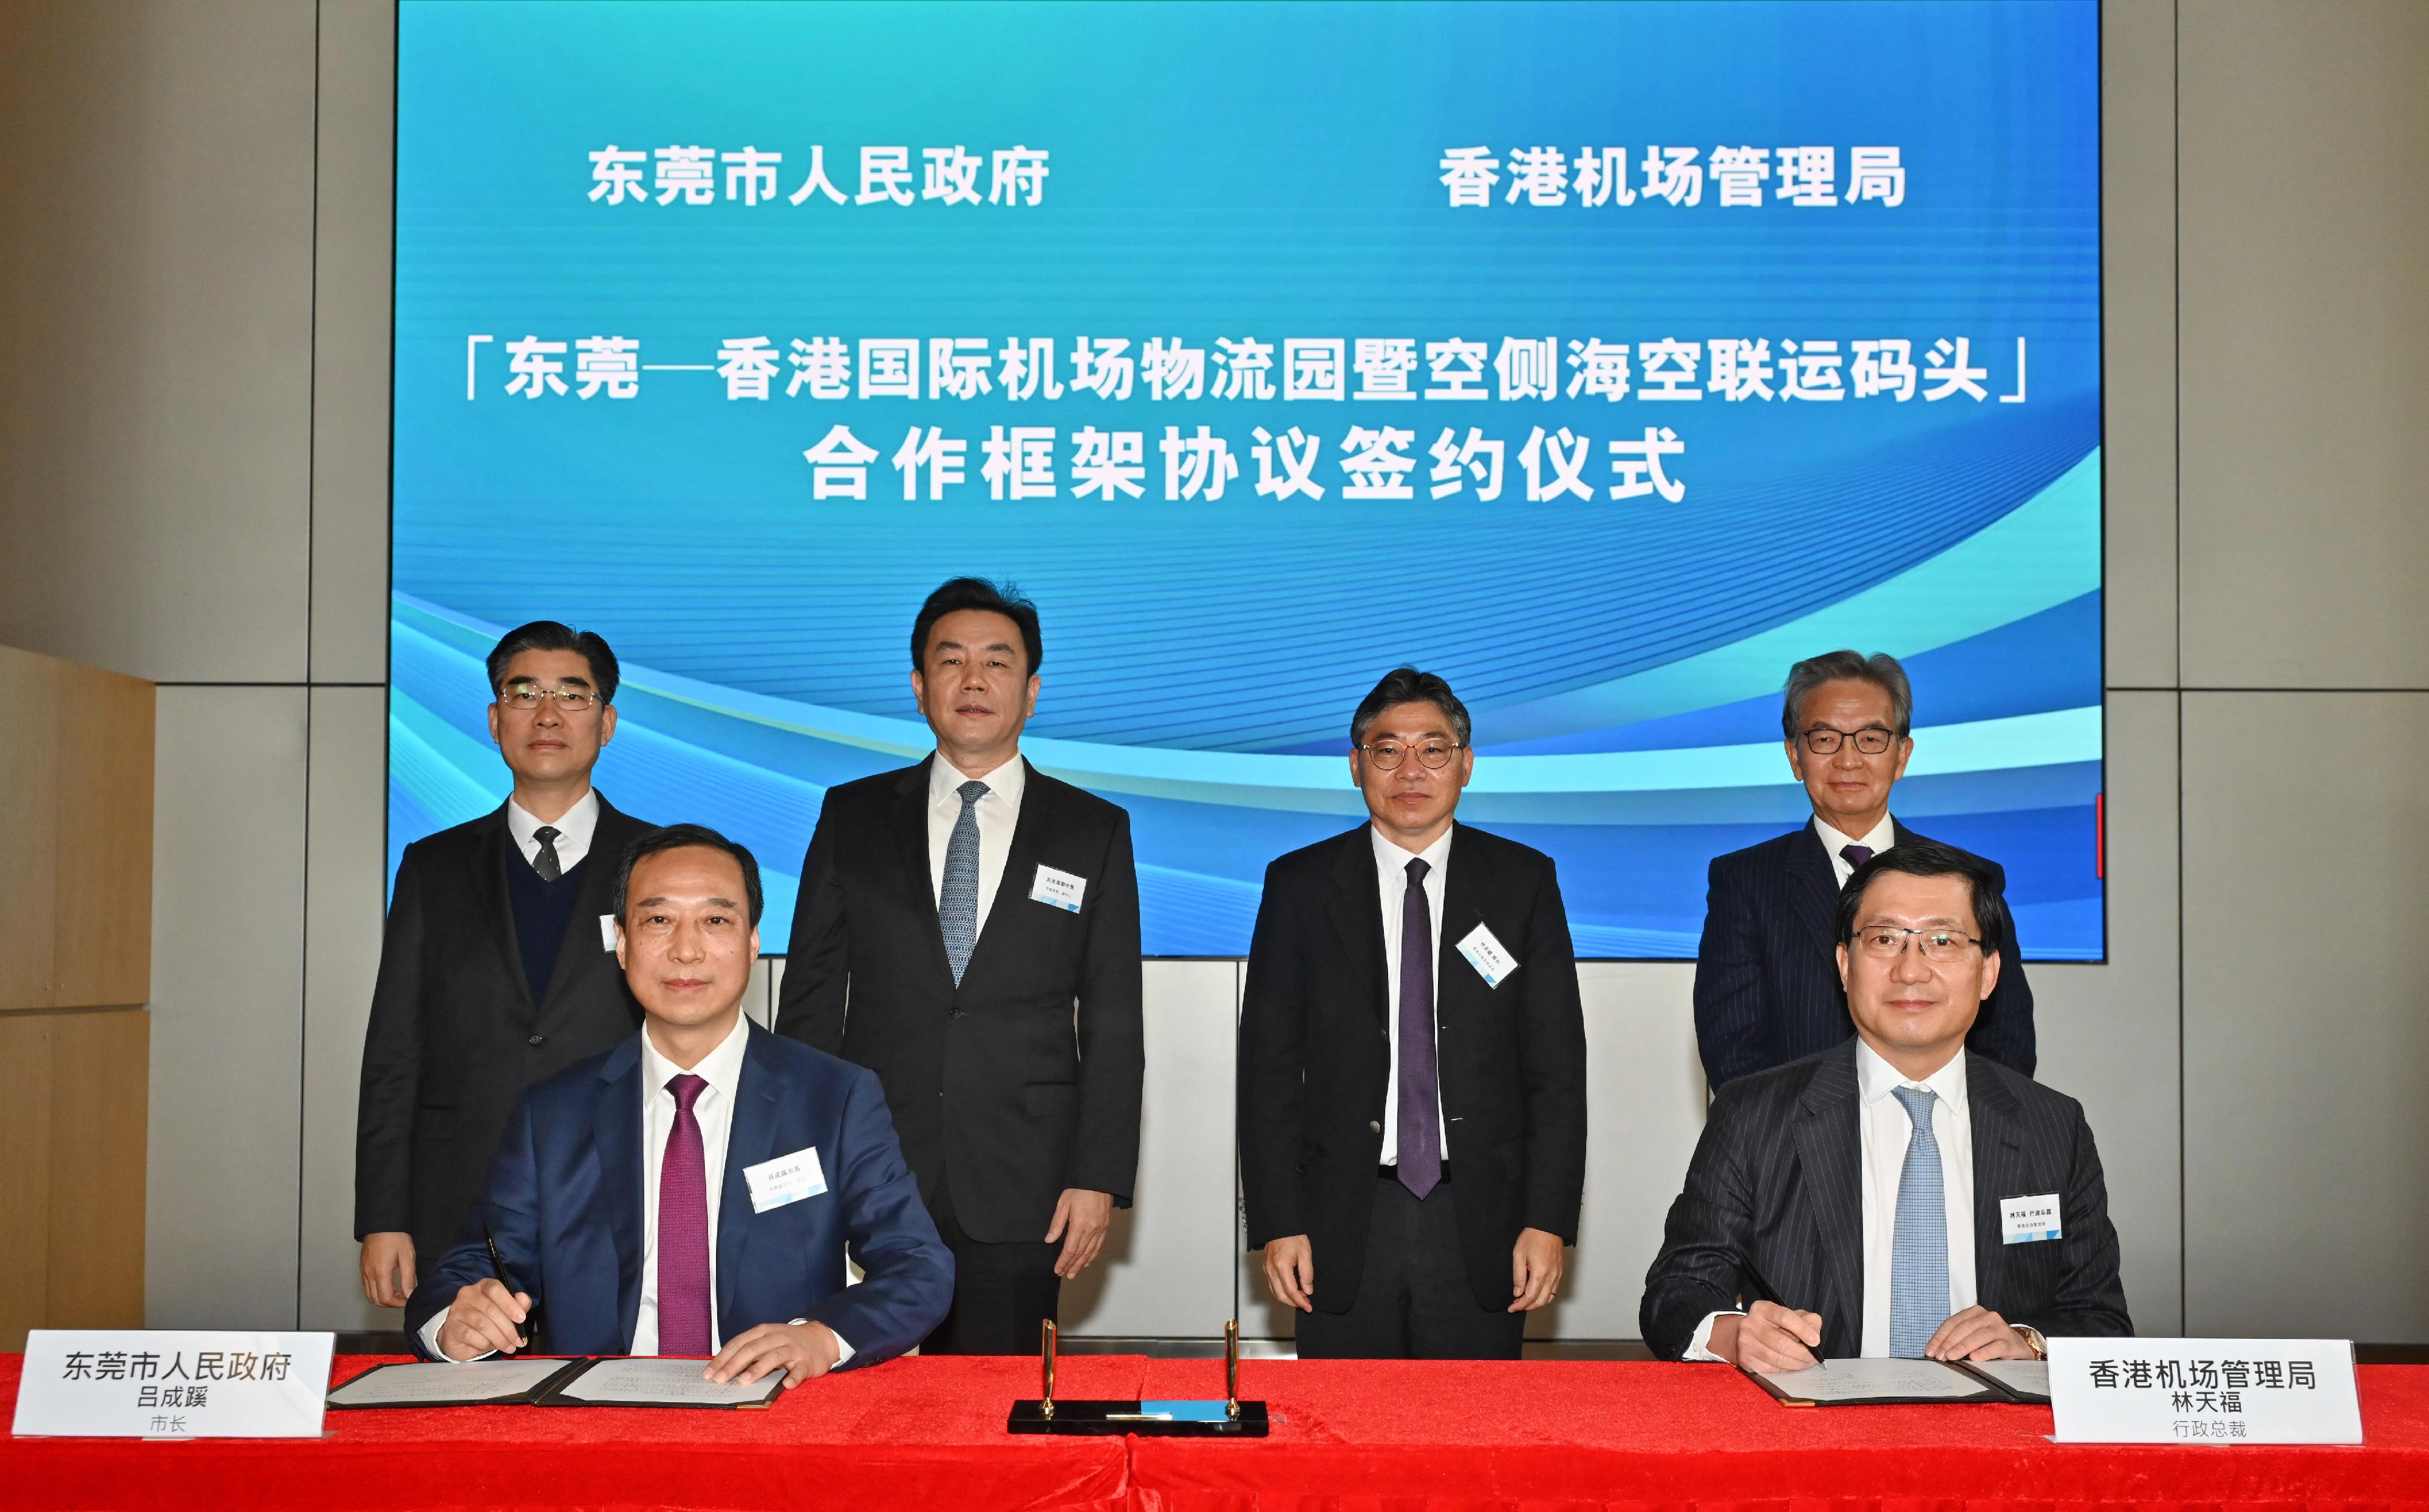 The Airport Authority Hong Kong (AAHK) and the Dongguan Municipal People's Government today (February 16) signed a co-operation framework agreement (CFA) to implement and foster the long-term development of the "sea-air intermodal cargo transshipment" mode between the two cities. Photo shows the Chief Executive Officer of the AAHK, Mr Fred Lam (front row, right), and the Mayor of the Dongguan Municipal People's Government, Mr Lyu Chengxi (front row, left), signing the CFA at HKIA Tower as witnessed by the Secretary for Transport and Logistics, Mr Lam Sai-hung (back row, second right); Deputy Mayor of the Dongguan Municipal People's Government Mr Liu Guangbin (back row, second left); the Secretary-General of the Dongguan Municipal People's Government, Mr Yan Jizong (back row, first left); and the Chairman of the AAHK, Mr Jack So (back row, first right).  